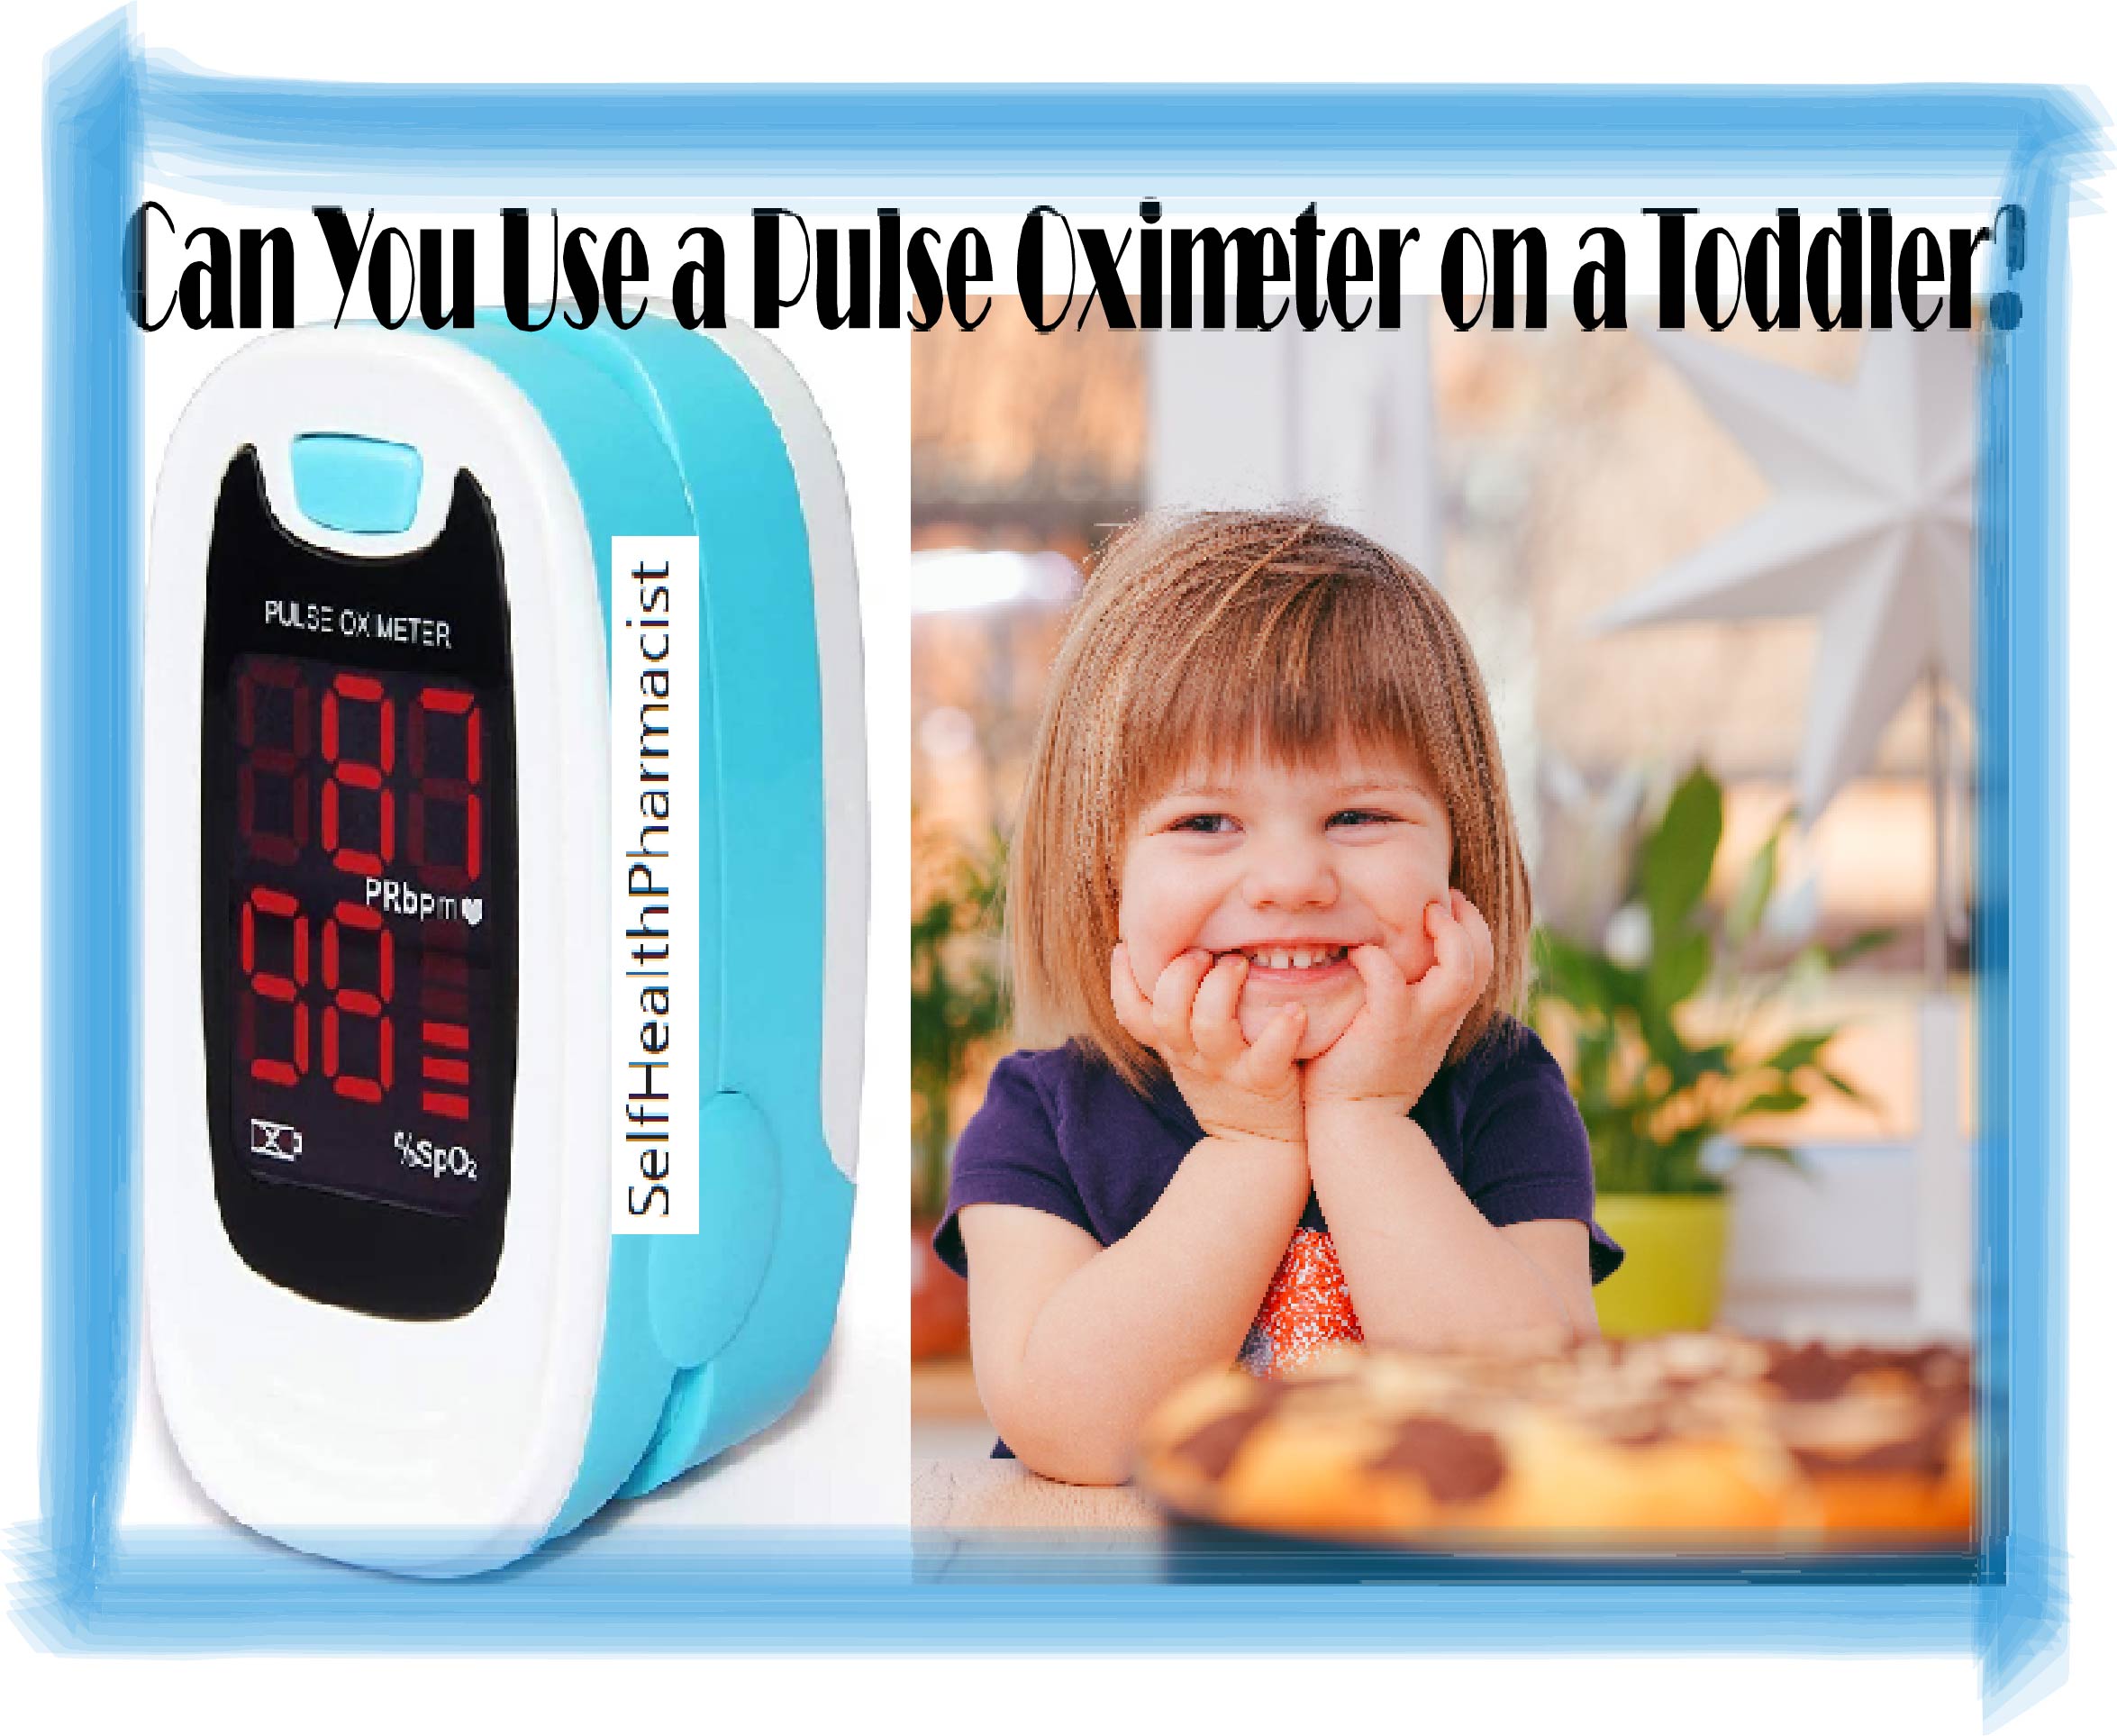 Can You Use a Pulse Oximeter on a Toddler?